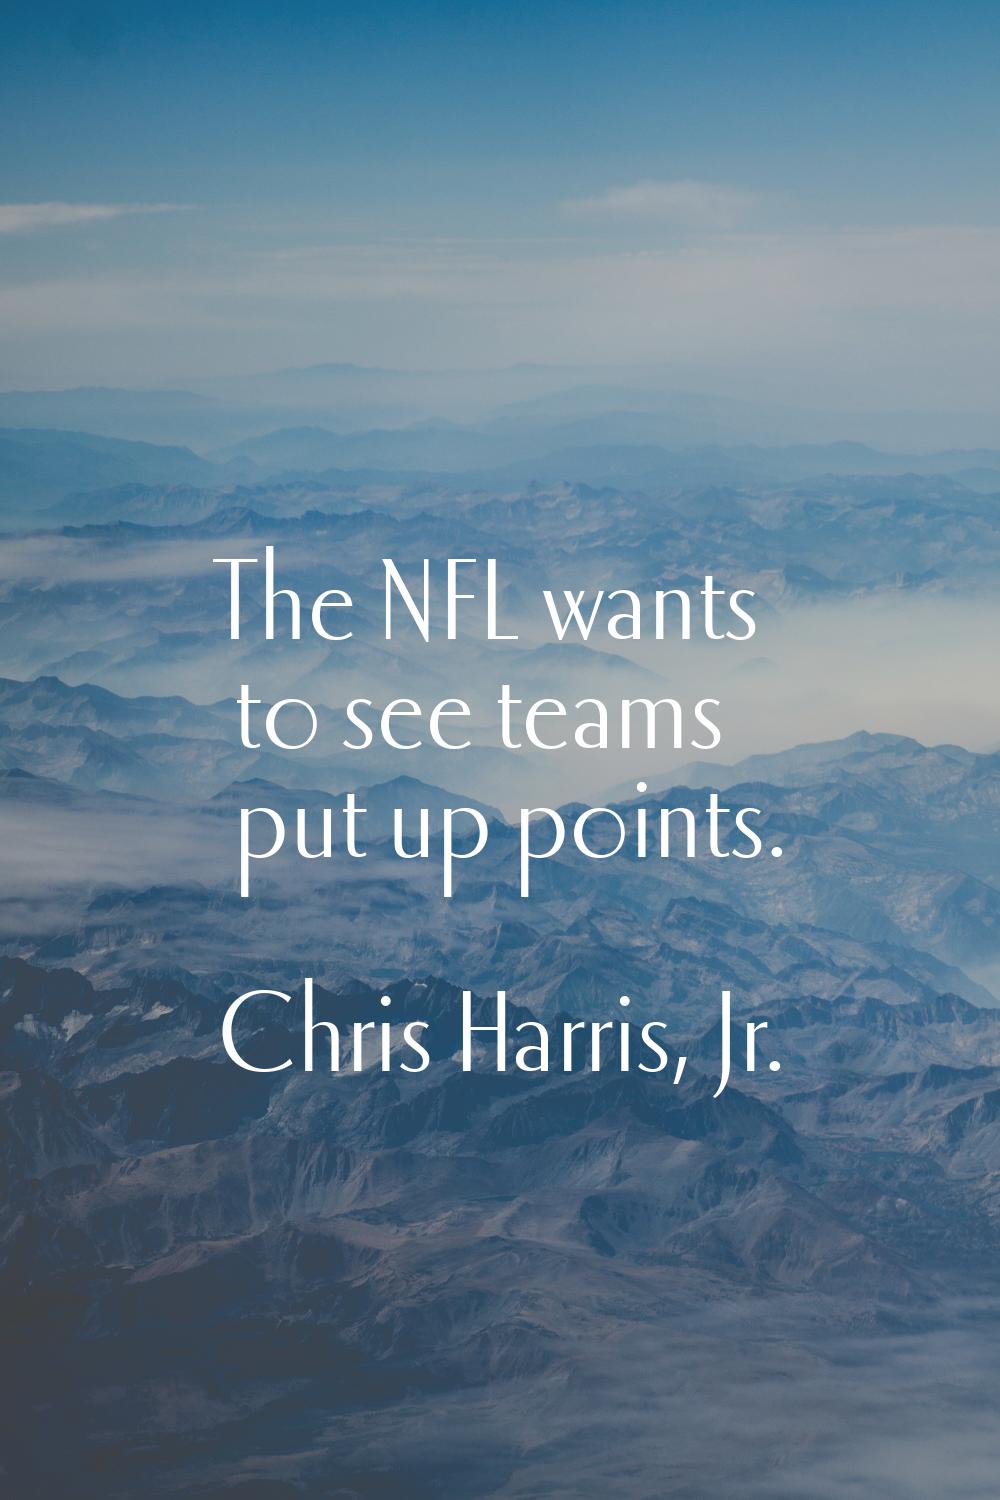 The NFL wants to see teams put up points.